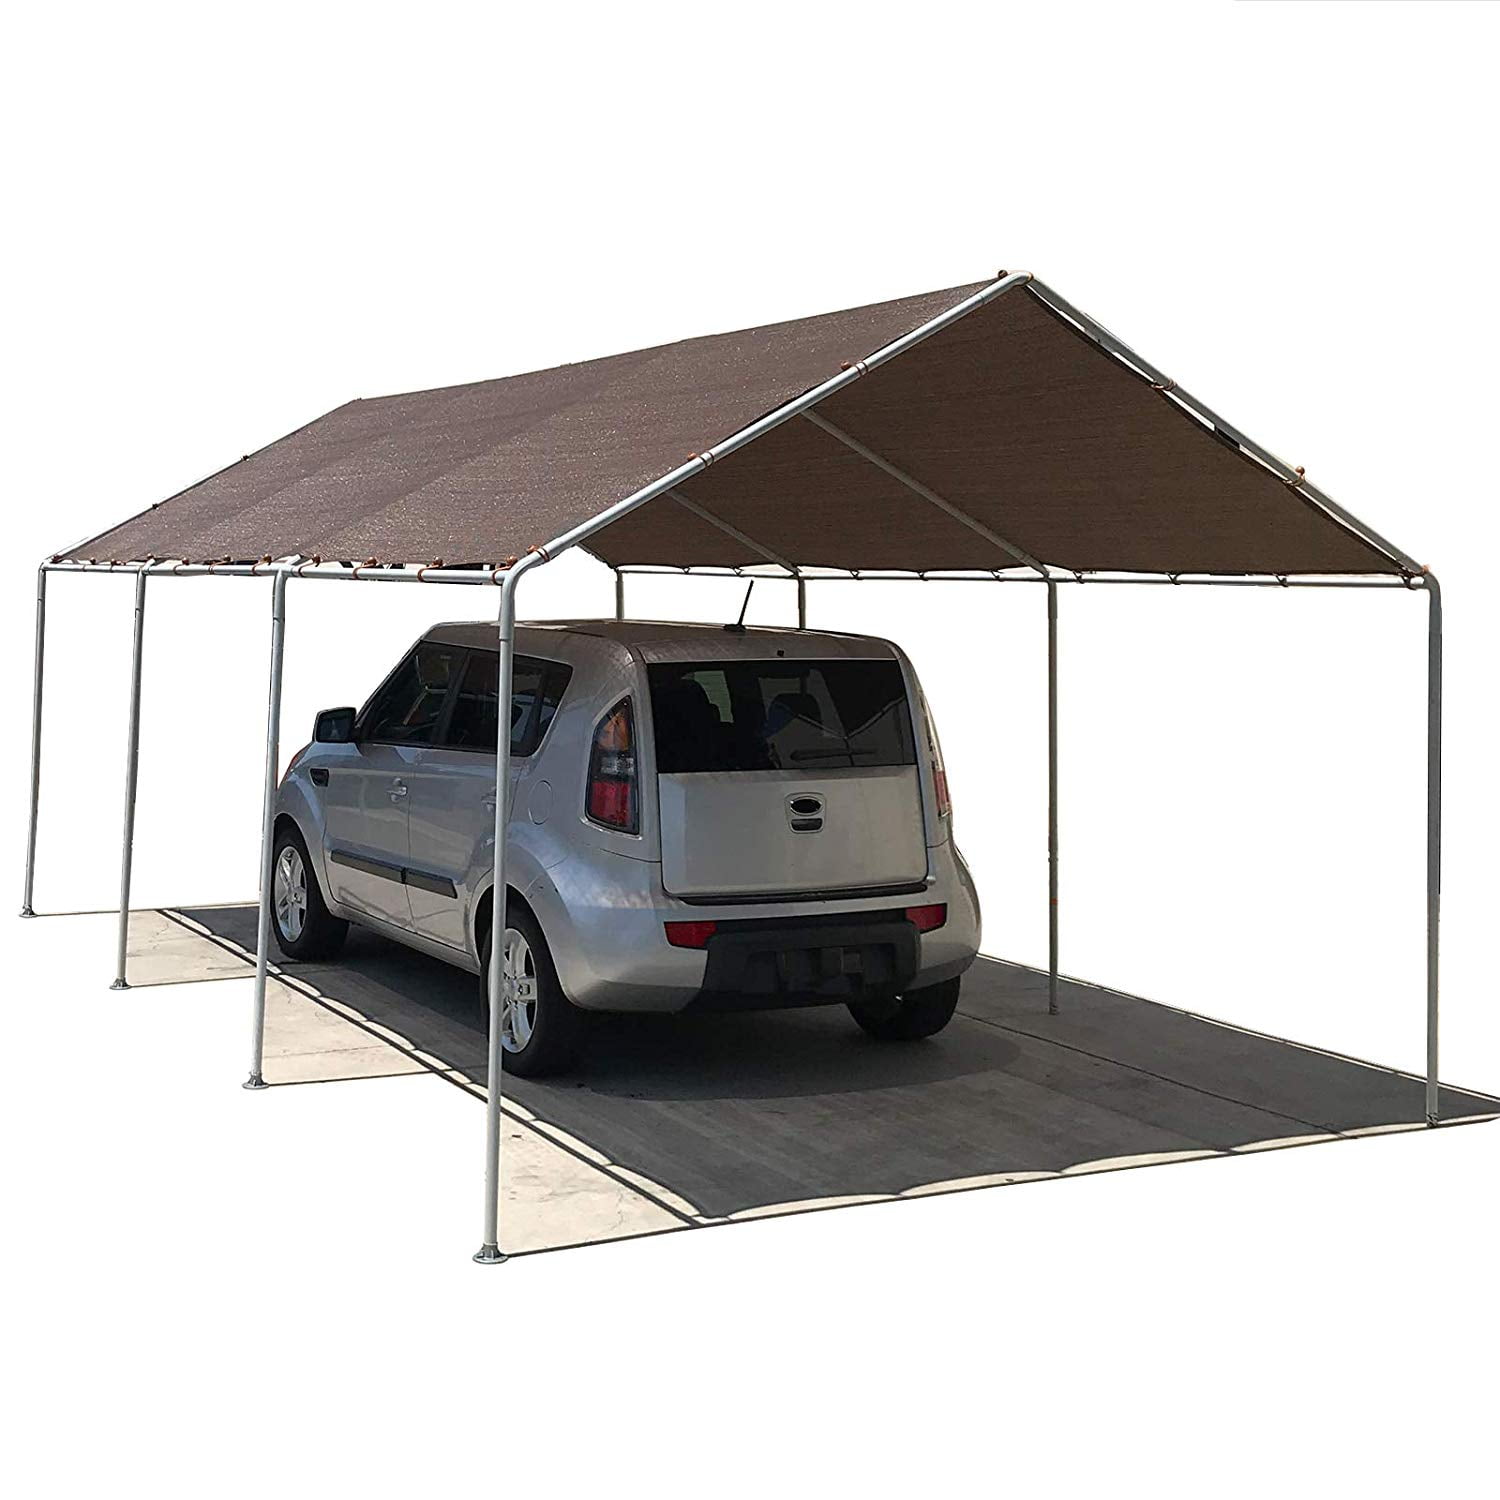 Camping Floors Furniture Boat 3x20 ft, Brown RV Alion Home Heavy Duty 12 Mil Poly Tarps Waterproof Covers for Tarpaulin Canopy Carport Pool or Roof Repair Items